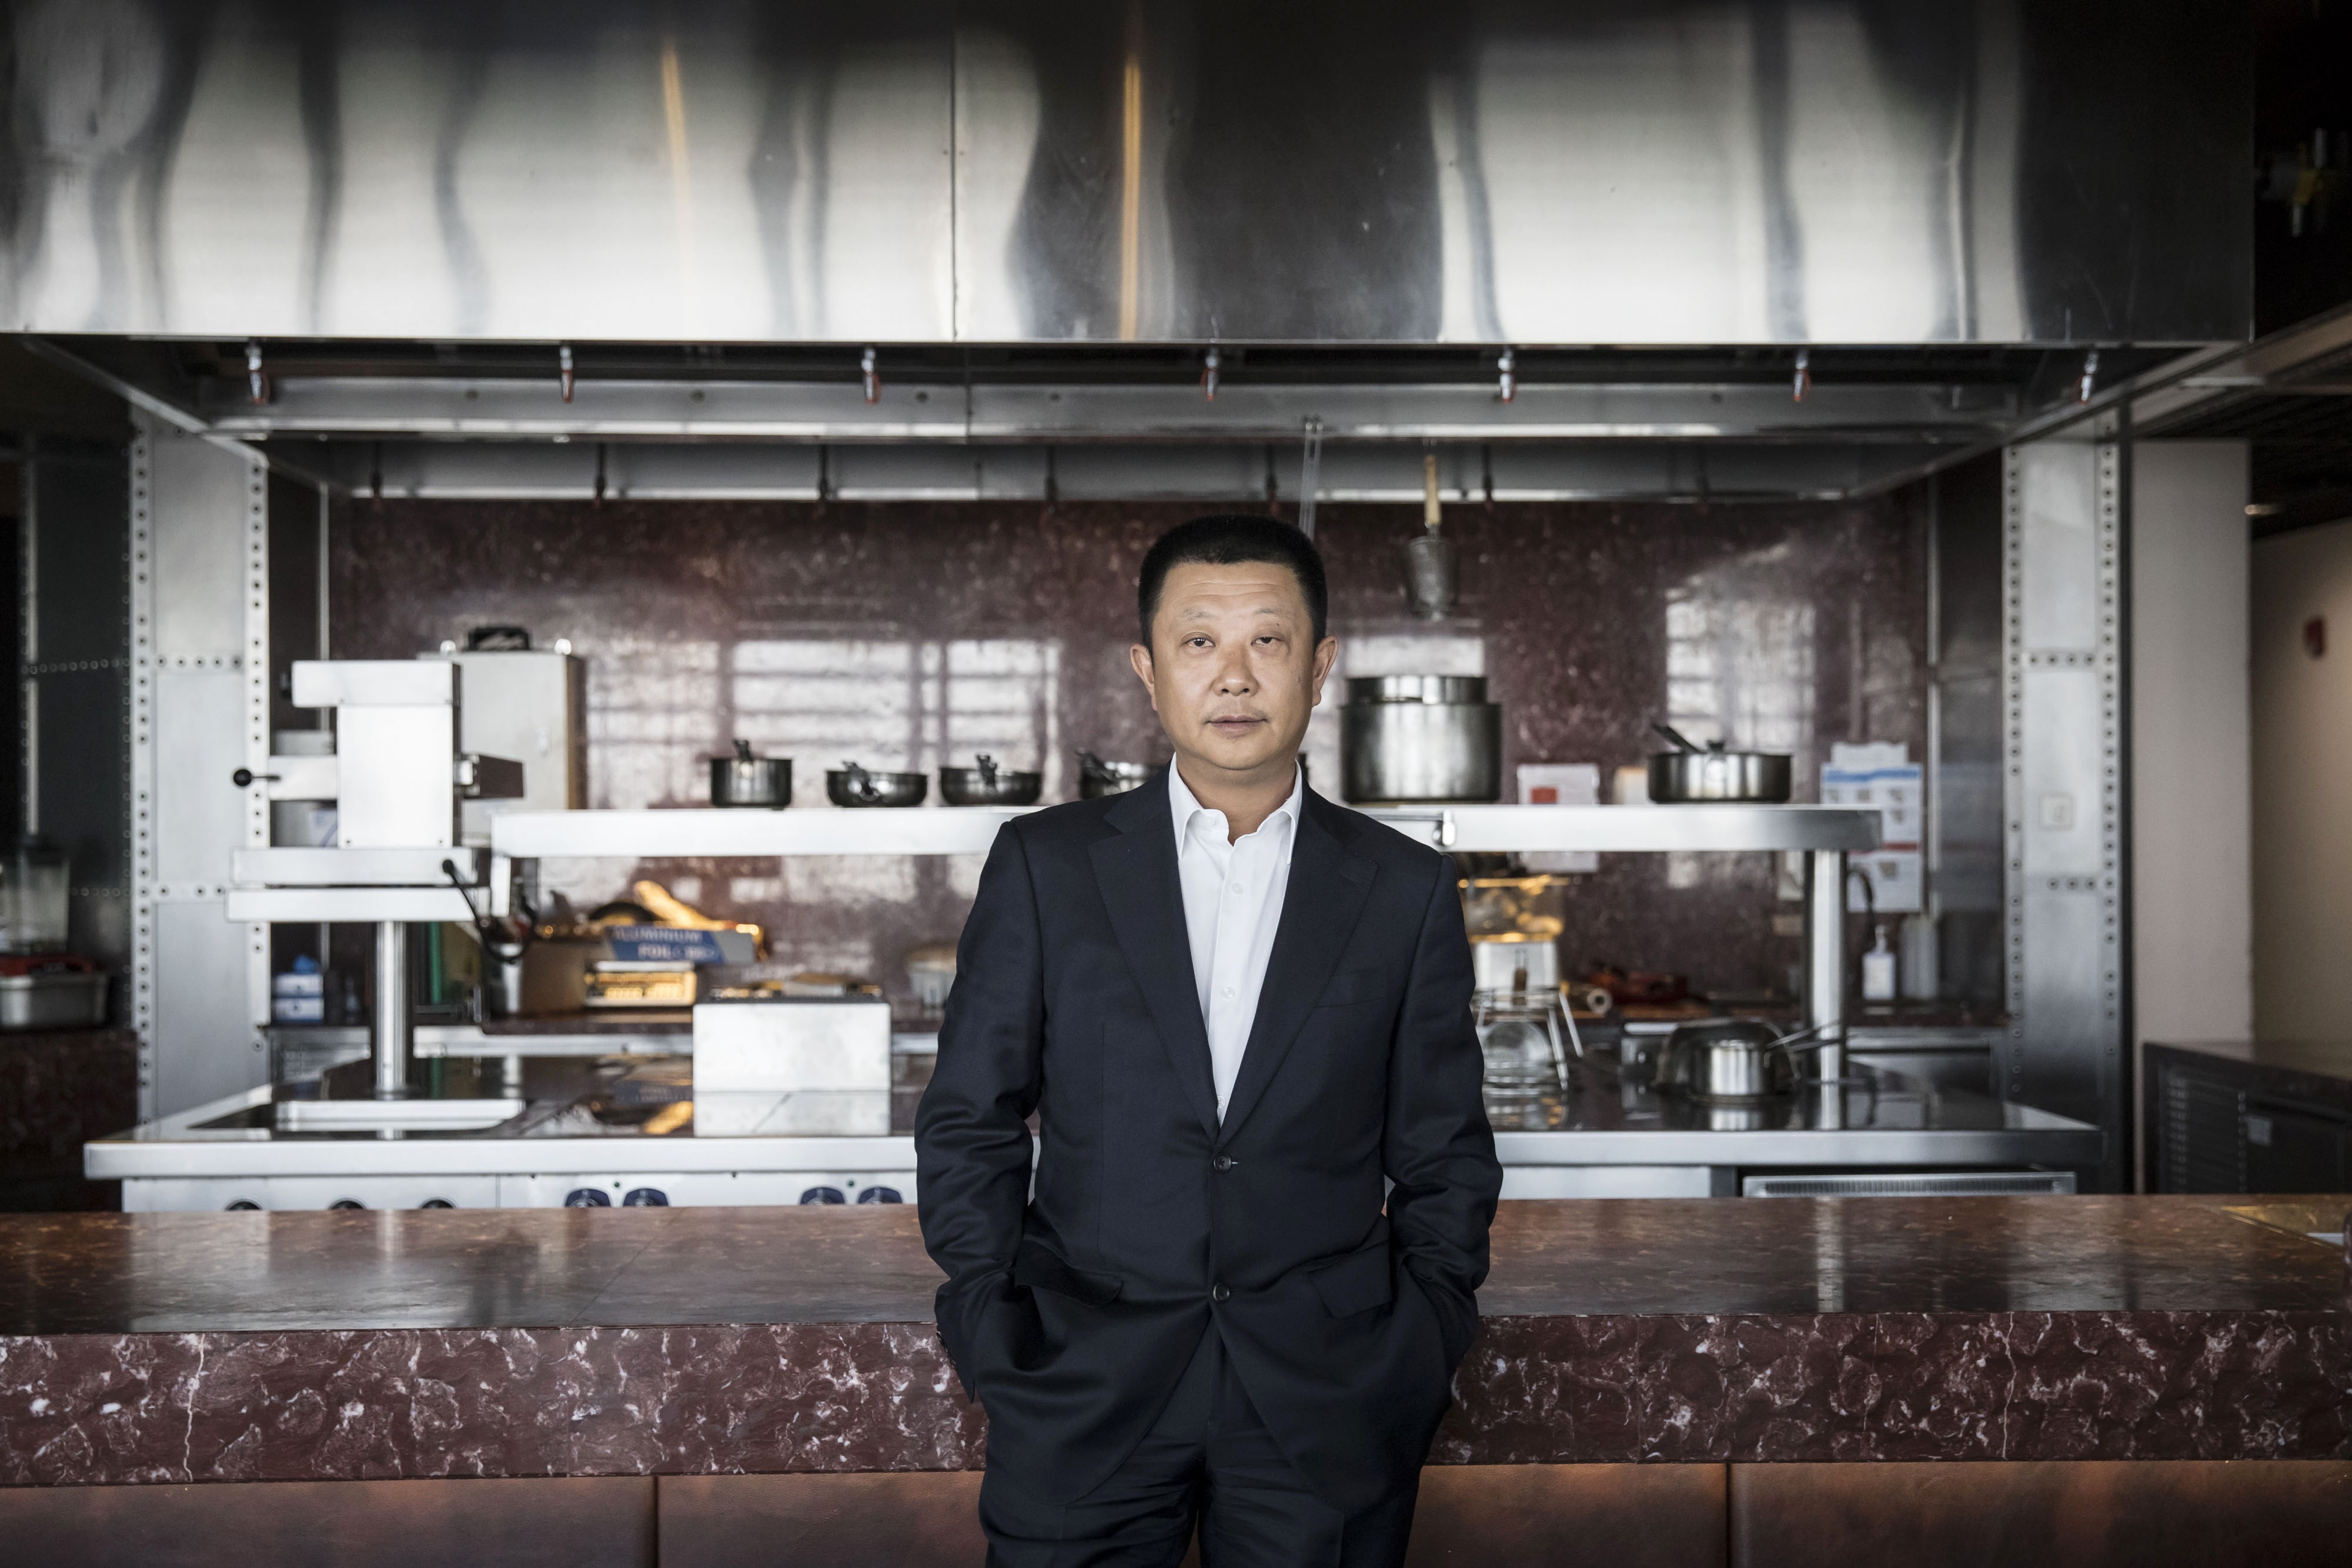 Billionaire Zhang Yong, founder and CEO of Haidilao International Holding, took the hotpot restaurant chain – which has nearly 600 outlets worldwide – public in Hong Kong in 2018. Photo: Bloomberg